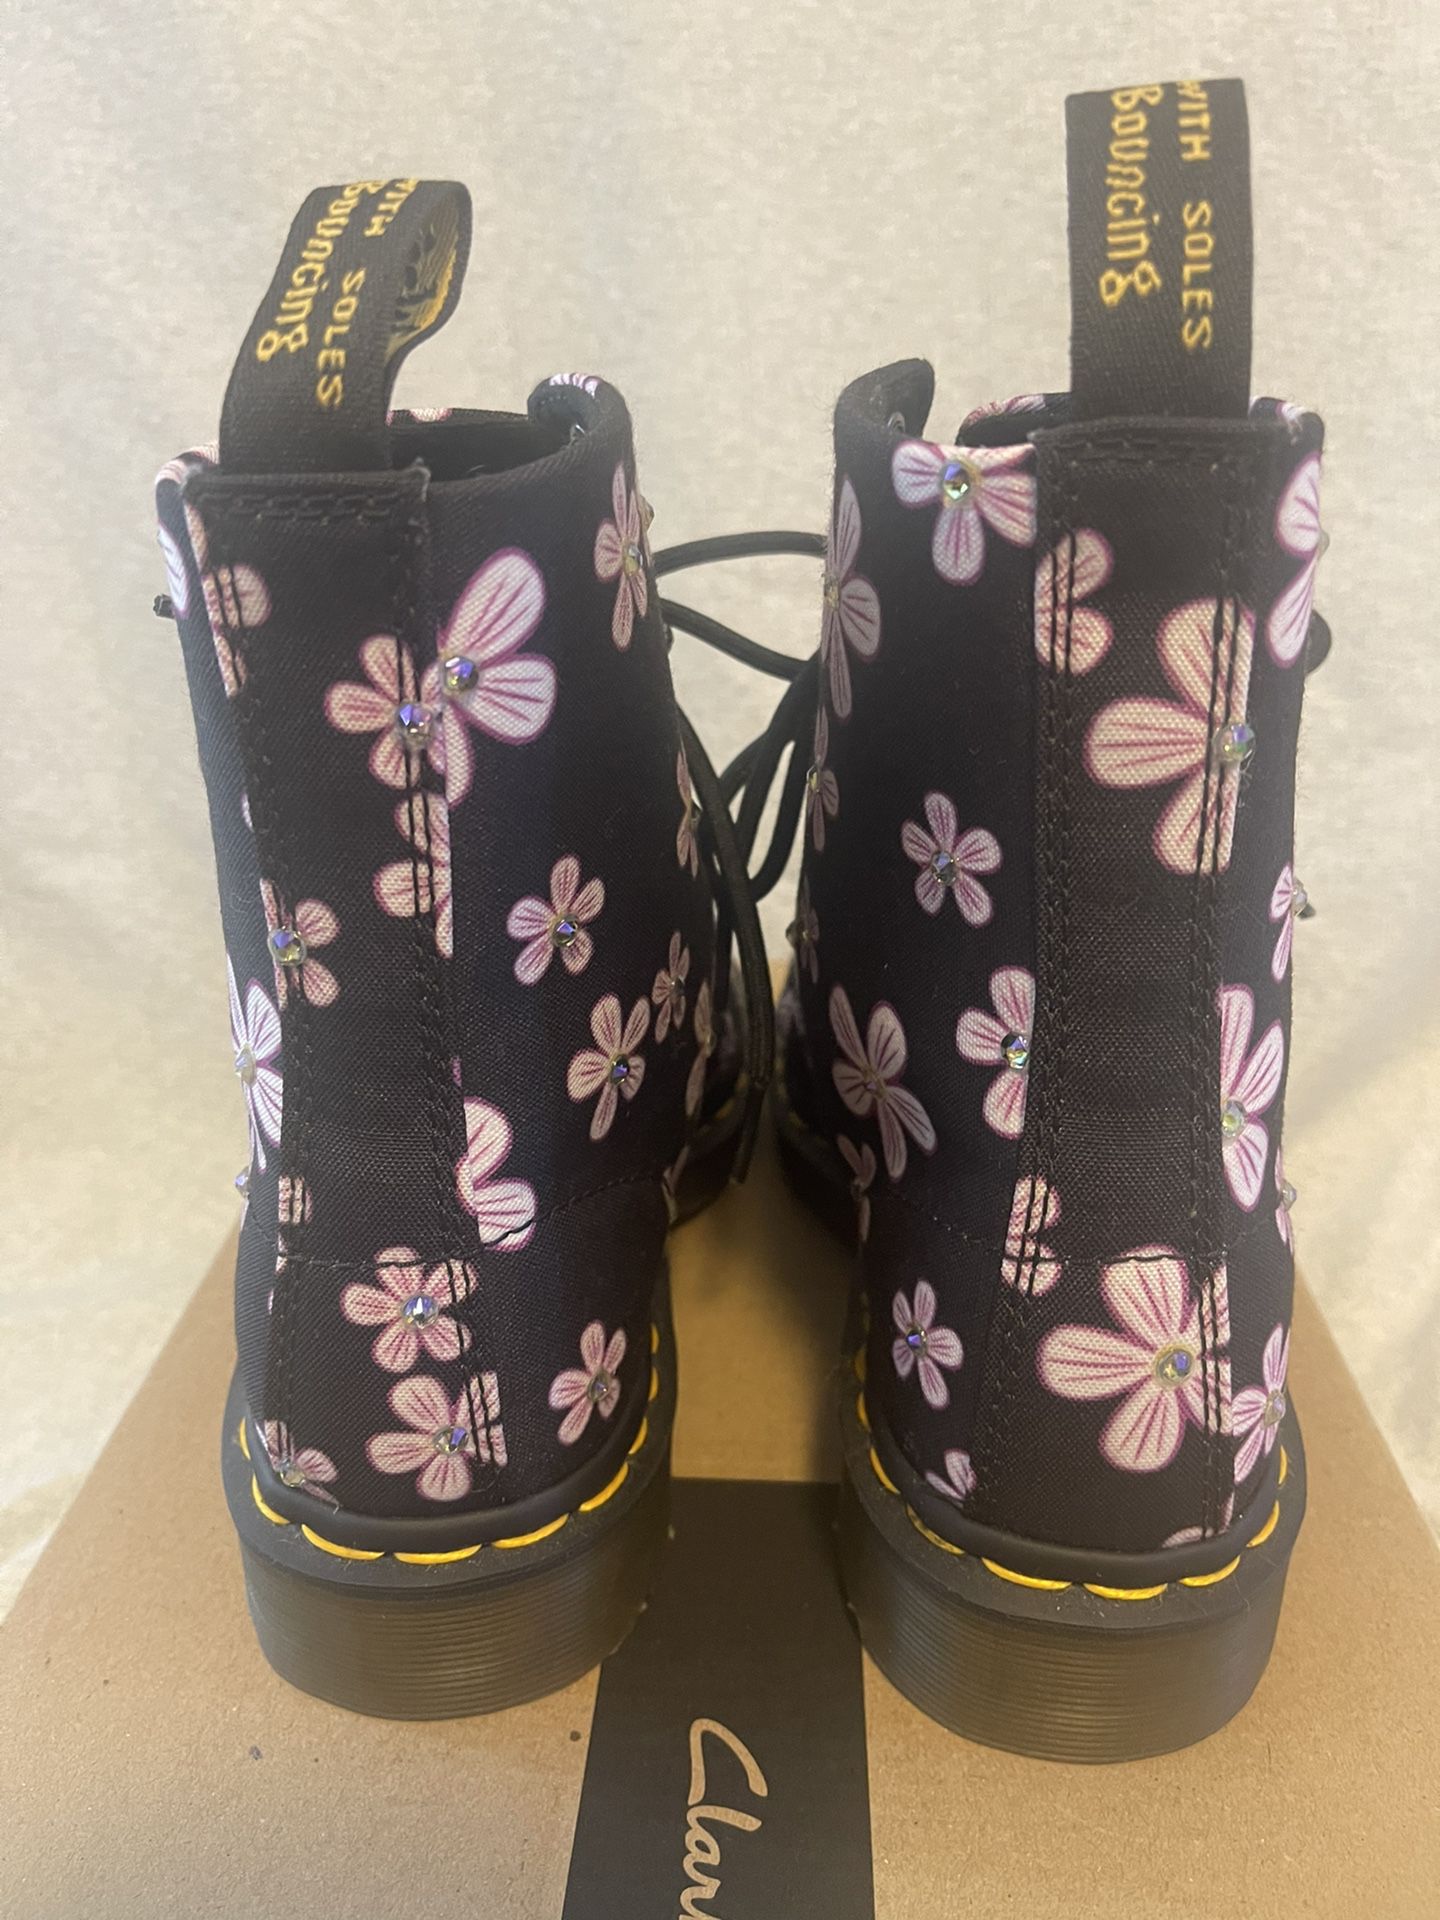 Dr. Martens Size 6 Women Page Meadow Canvas Boots Black Pink Floral Flower